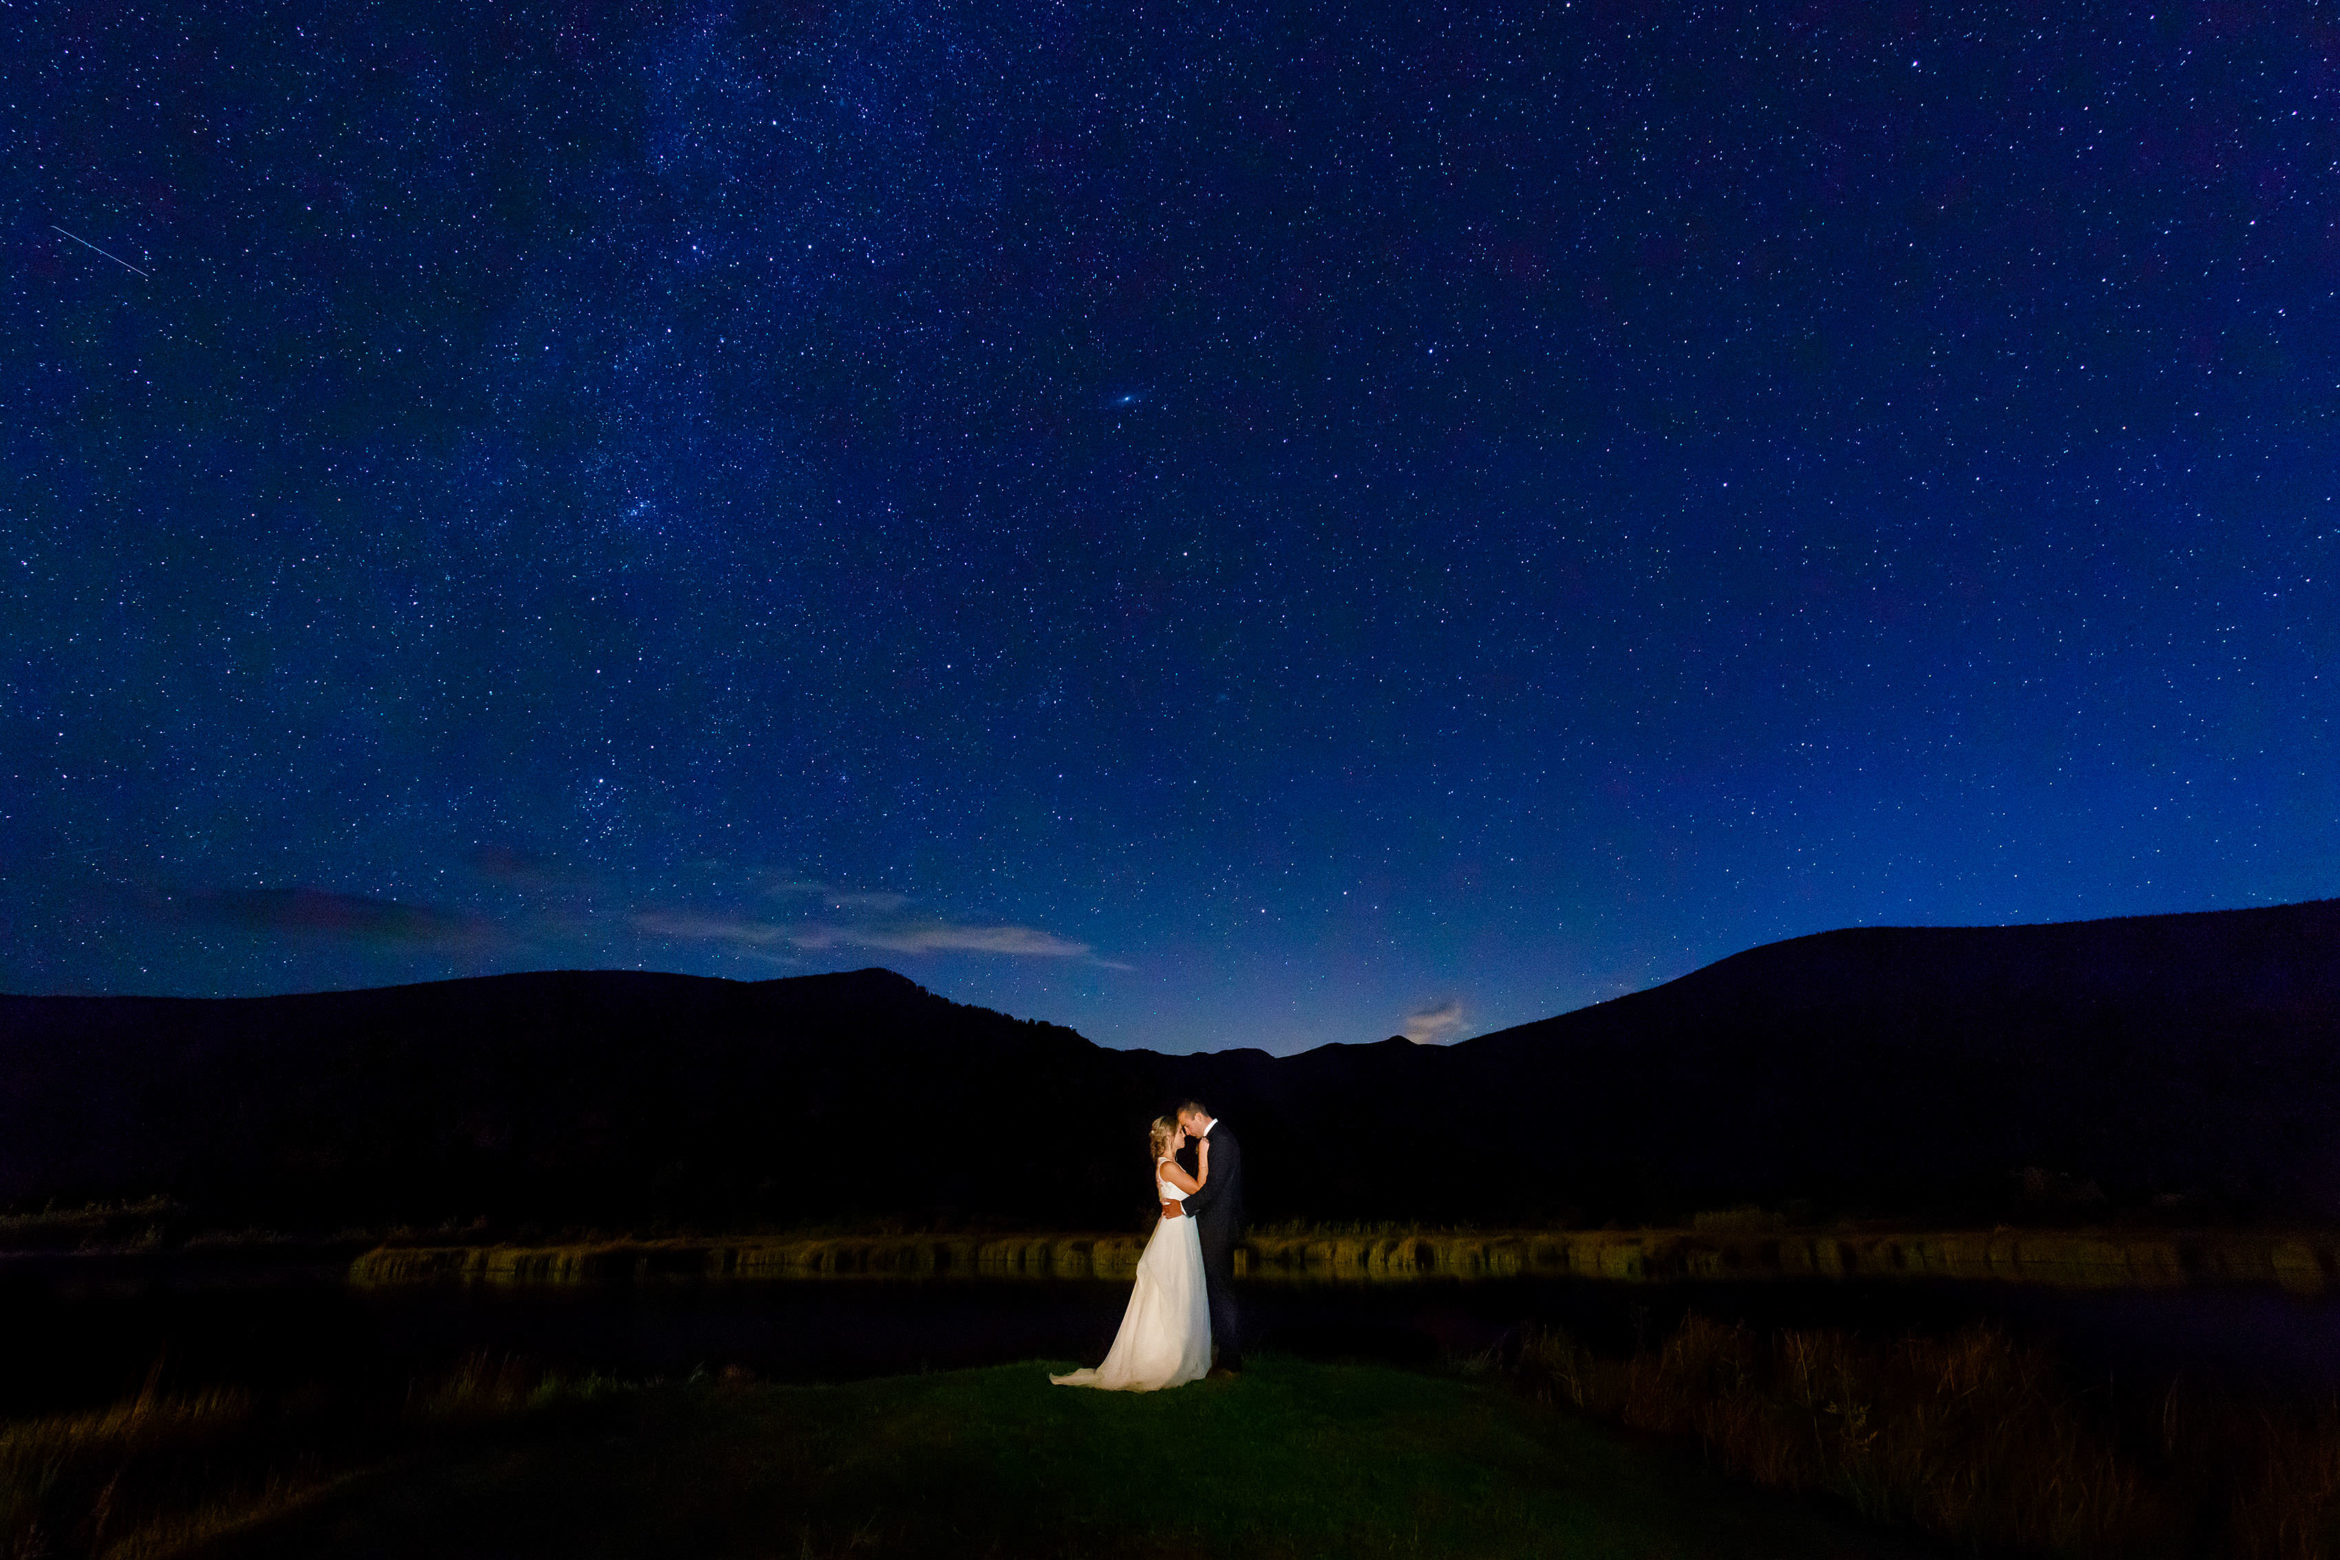 Meghan and Kevin embrace under the stars during their fall wedding at Camp Hale in Colorado